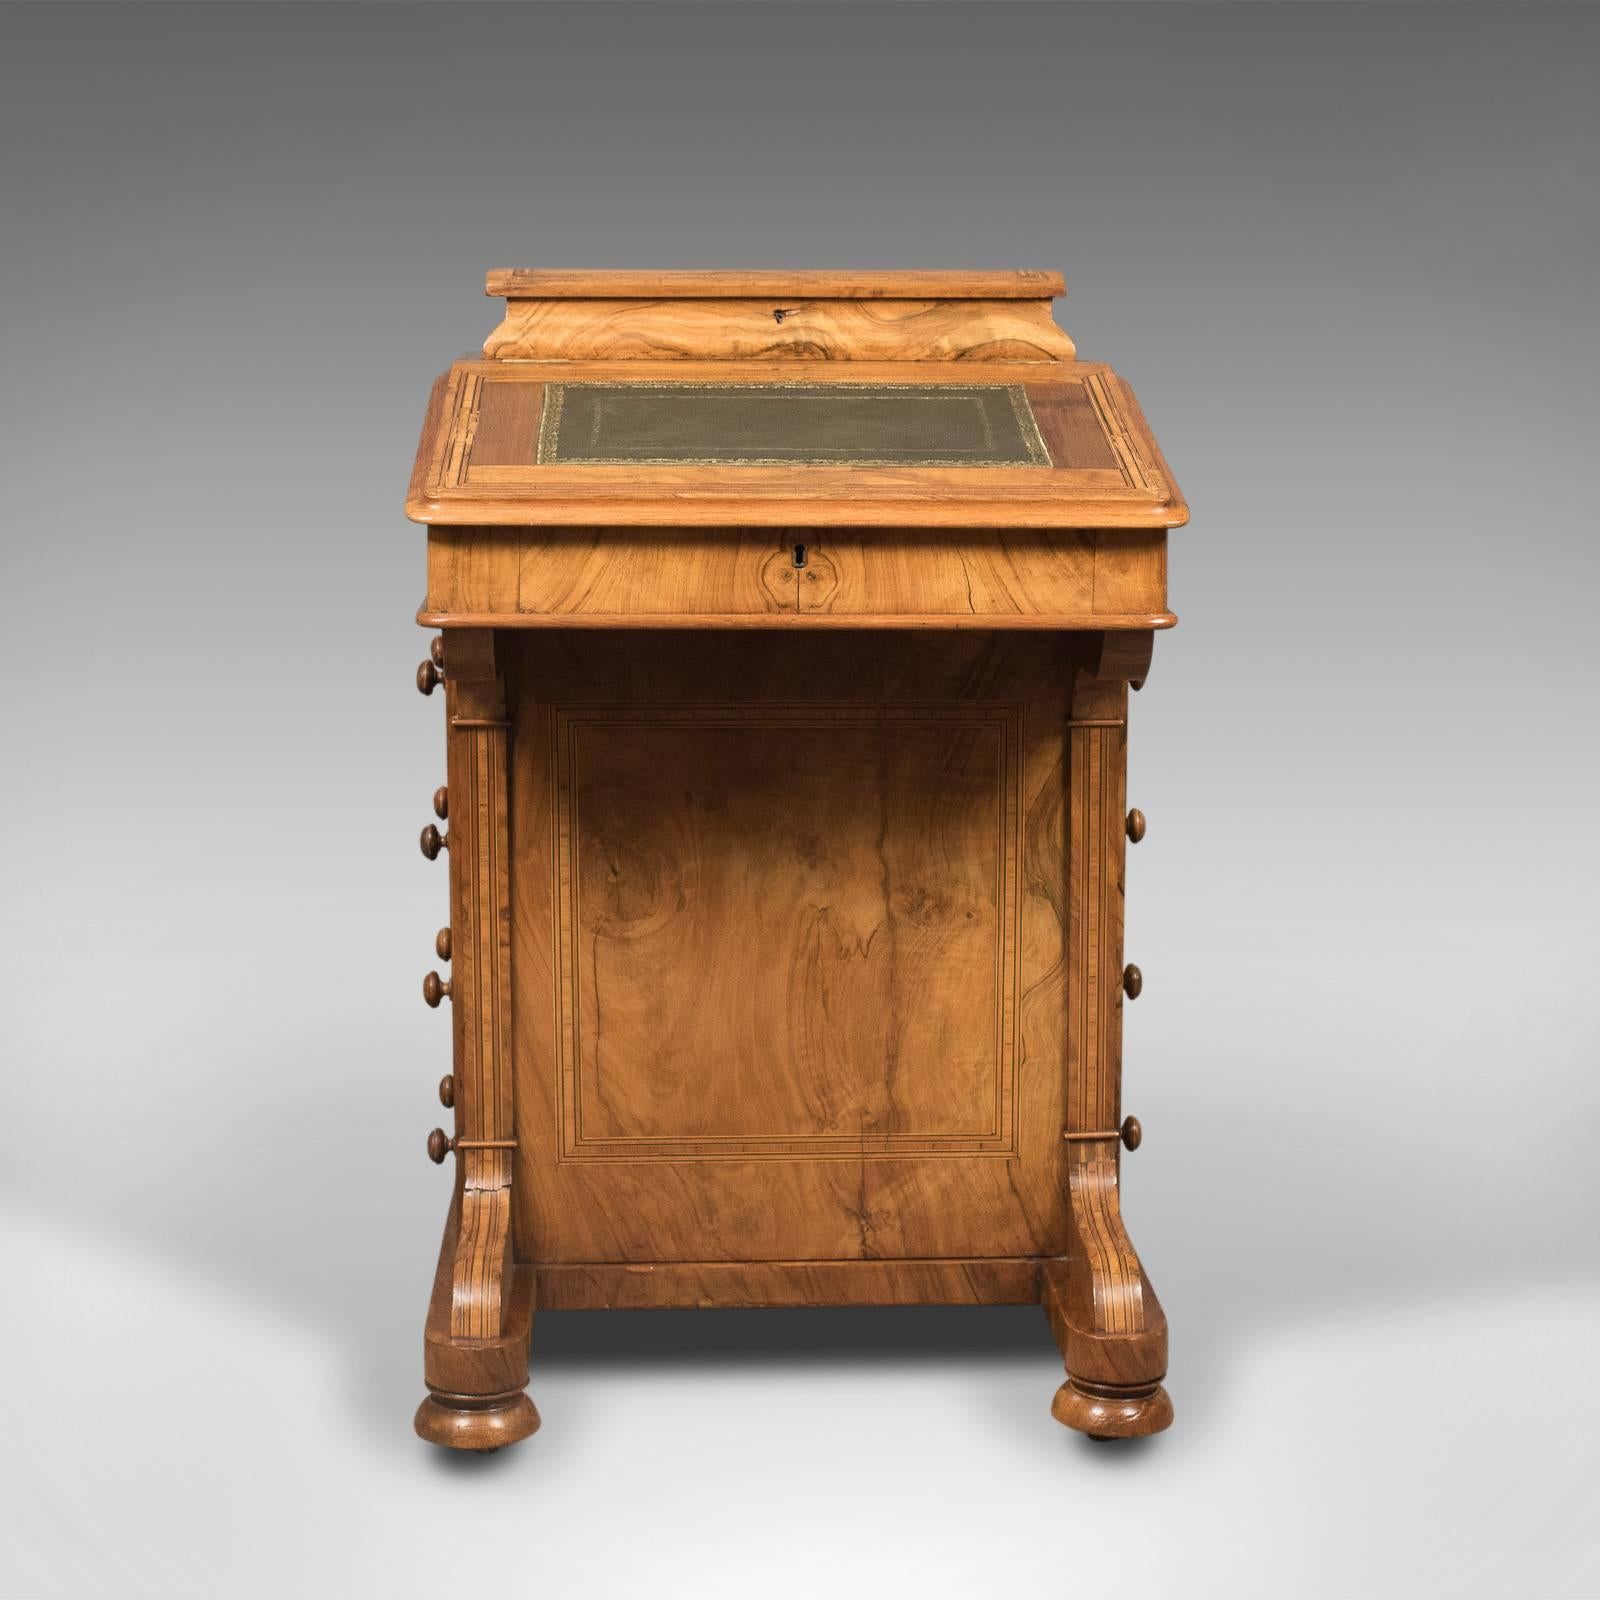 This is a Victorian antique Davenport in burr walnut. An English desk, dating to circa 1850.

Attractive grain interest in the well figured burr walnut
Light honey tones in a polished wax finish
Highlighted with subtle crossbanding in ebony and